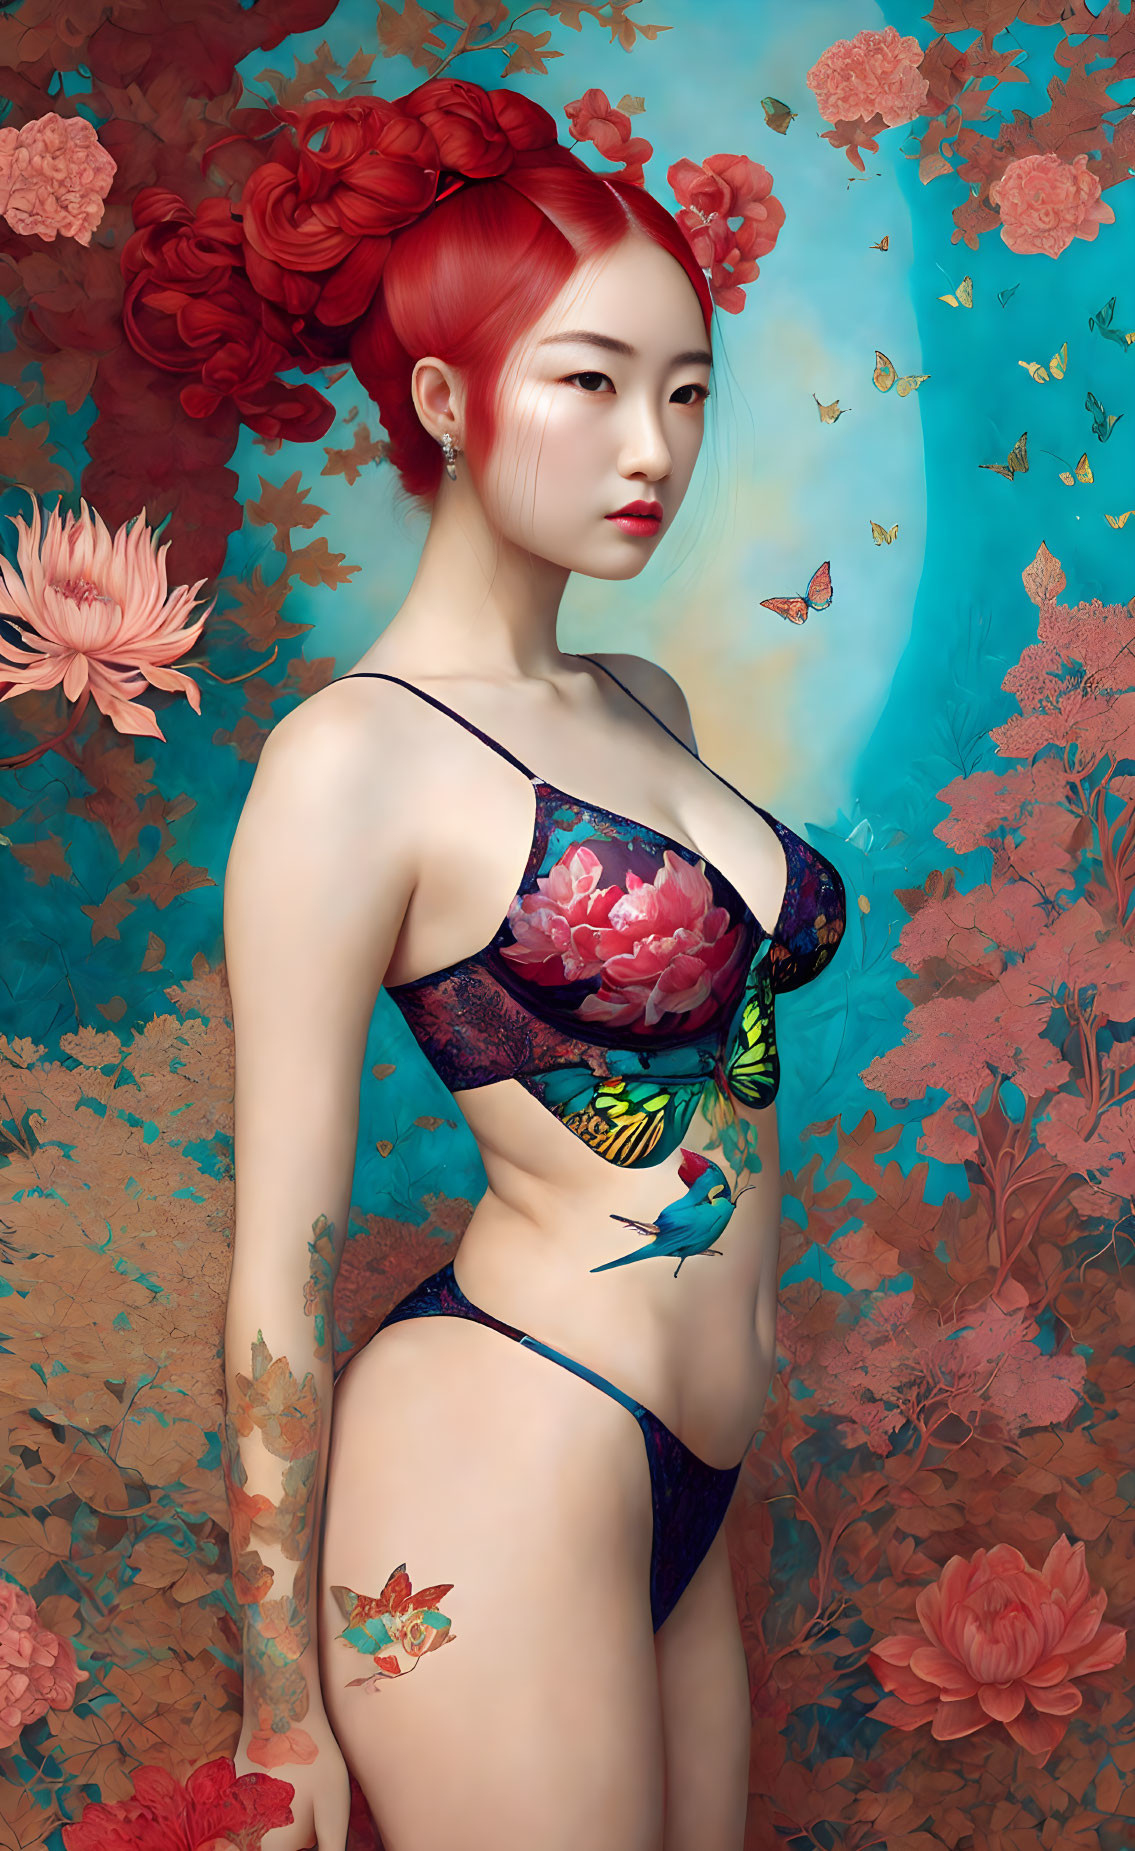 Red-Haired Woman in Floral Bikini Against Blue Background